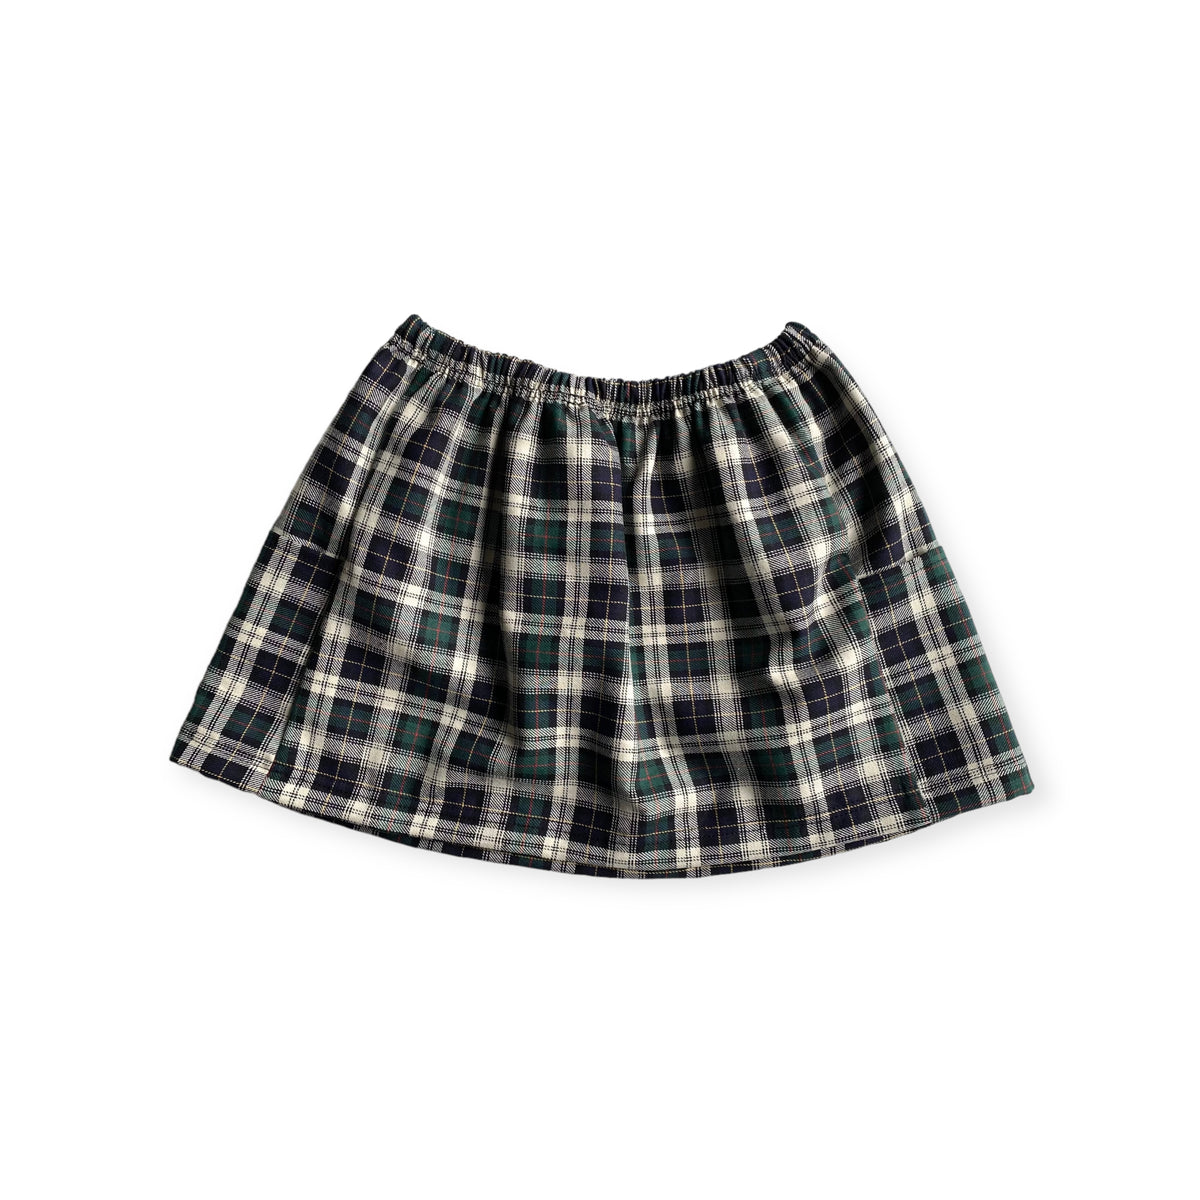 Christiana Skirt in 'Holly Plaid' - Ready To Ship